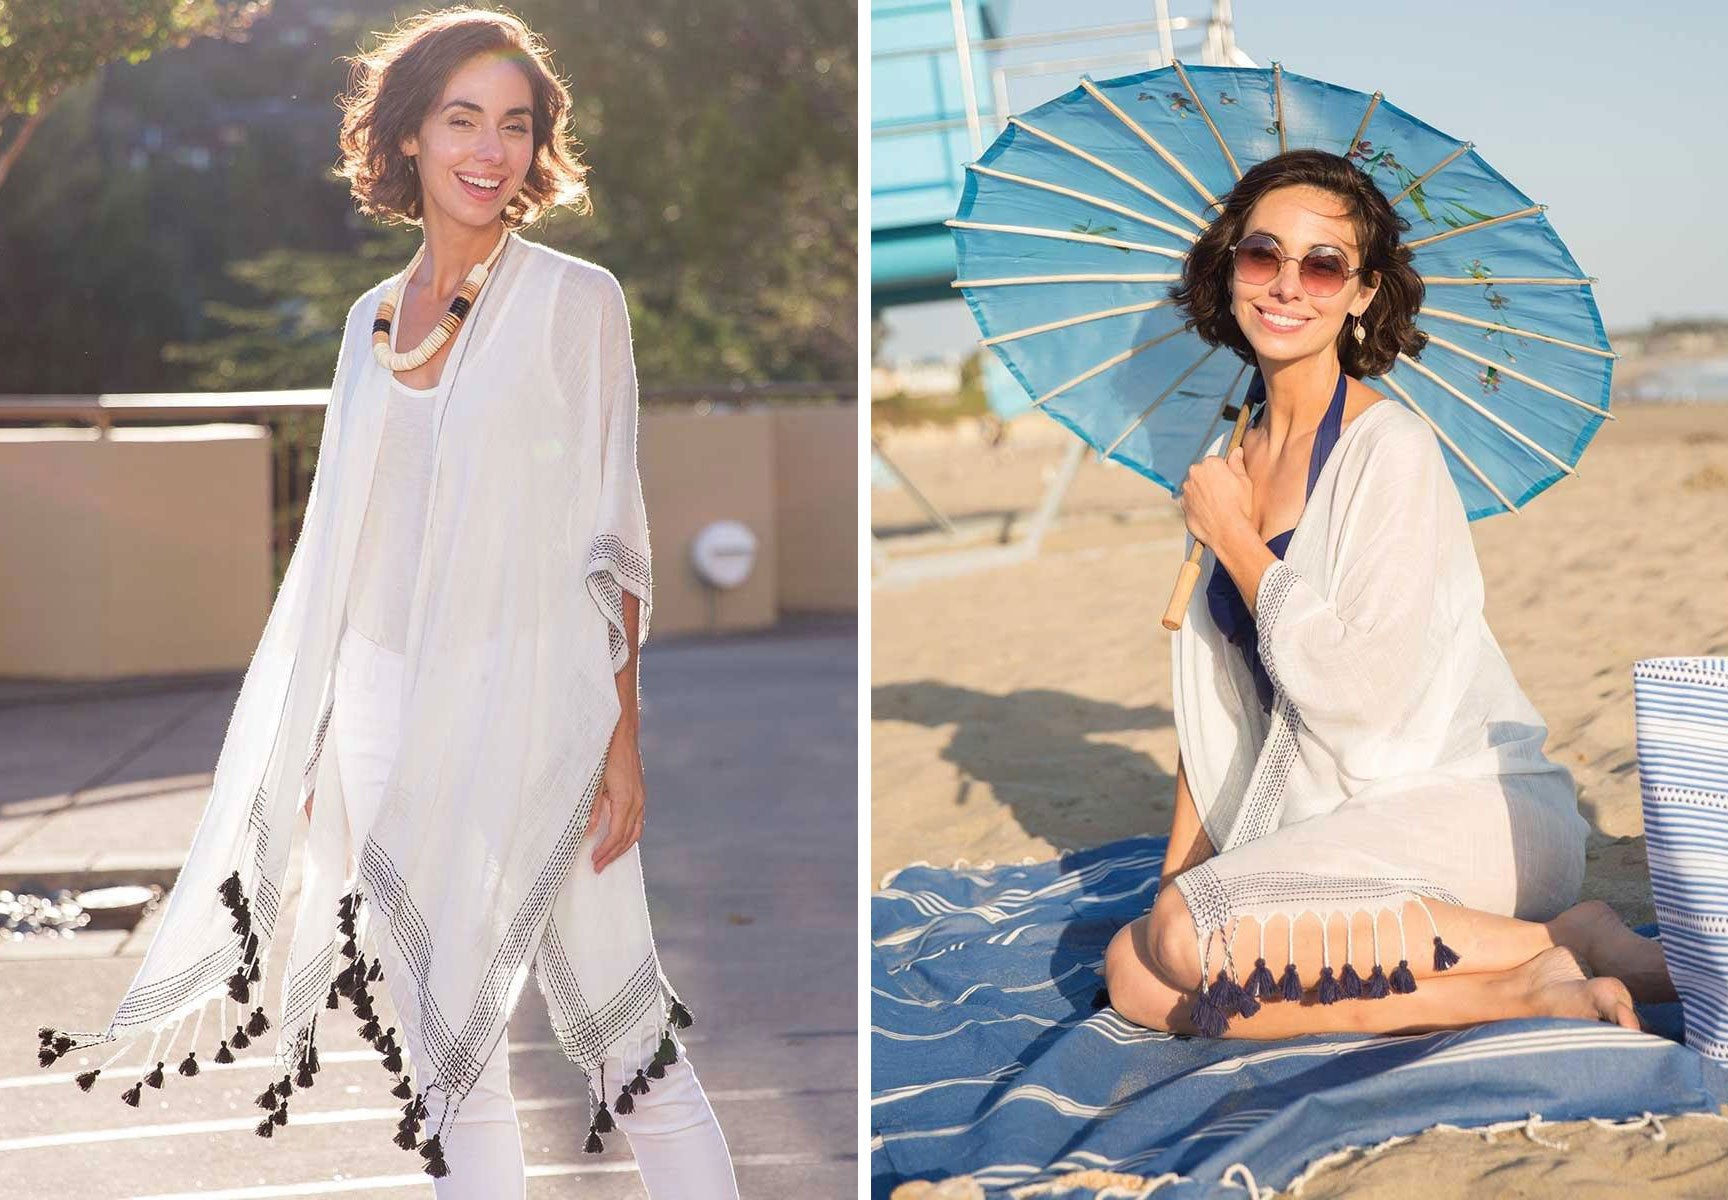 Long, white tassel kimono with chic accent embroidery - perfect for the beach or your dinner date